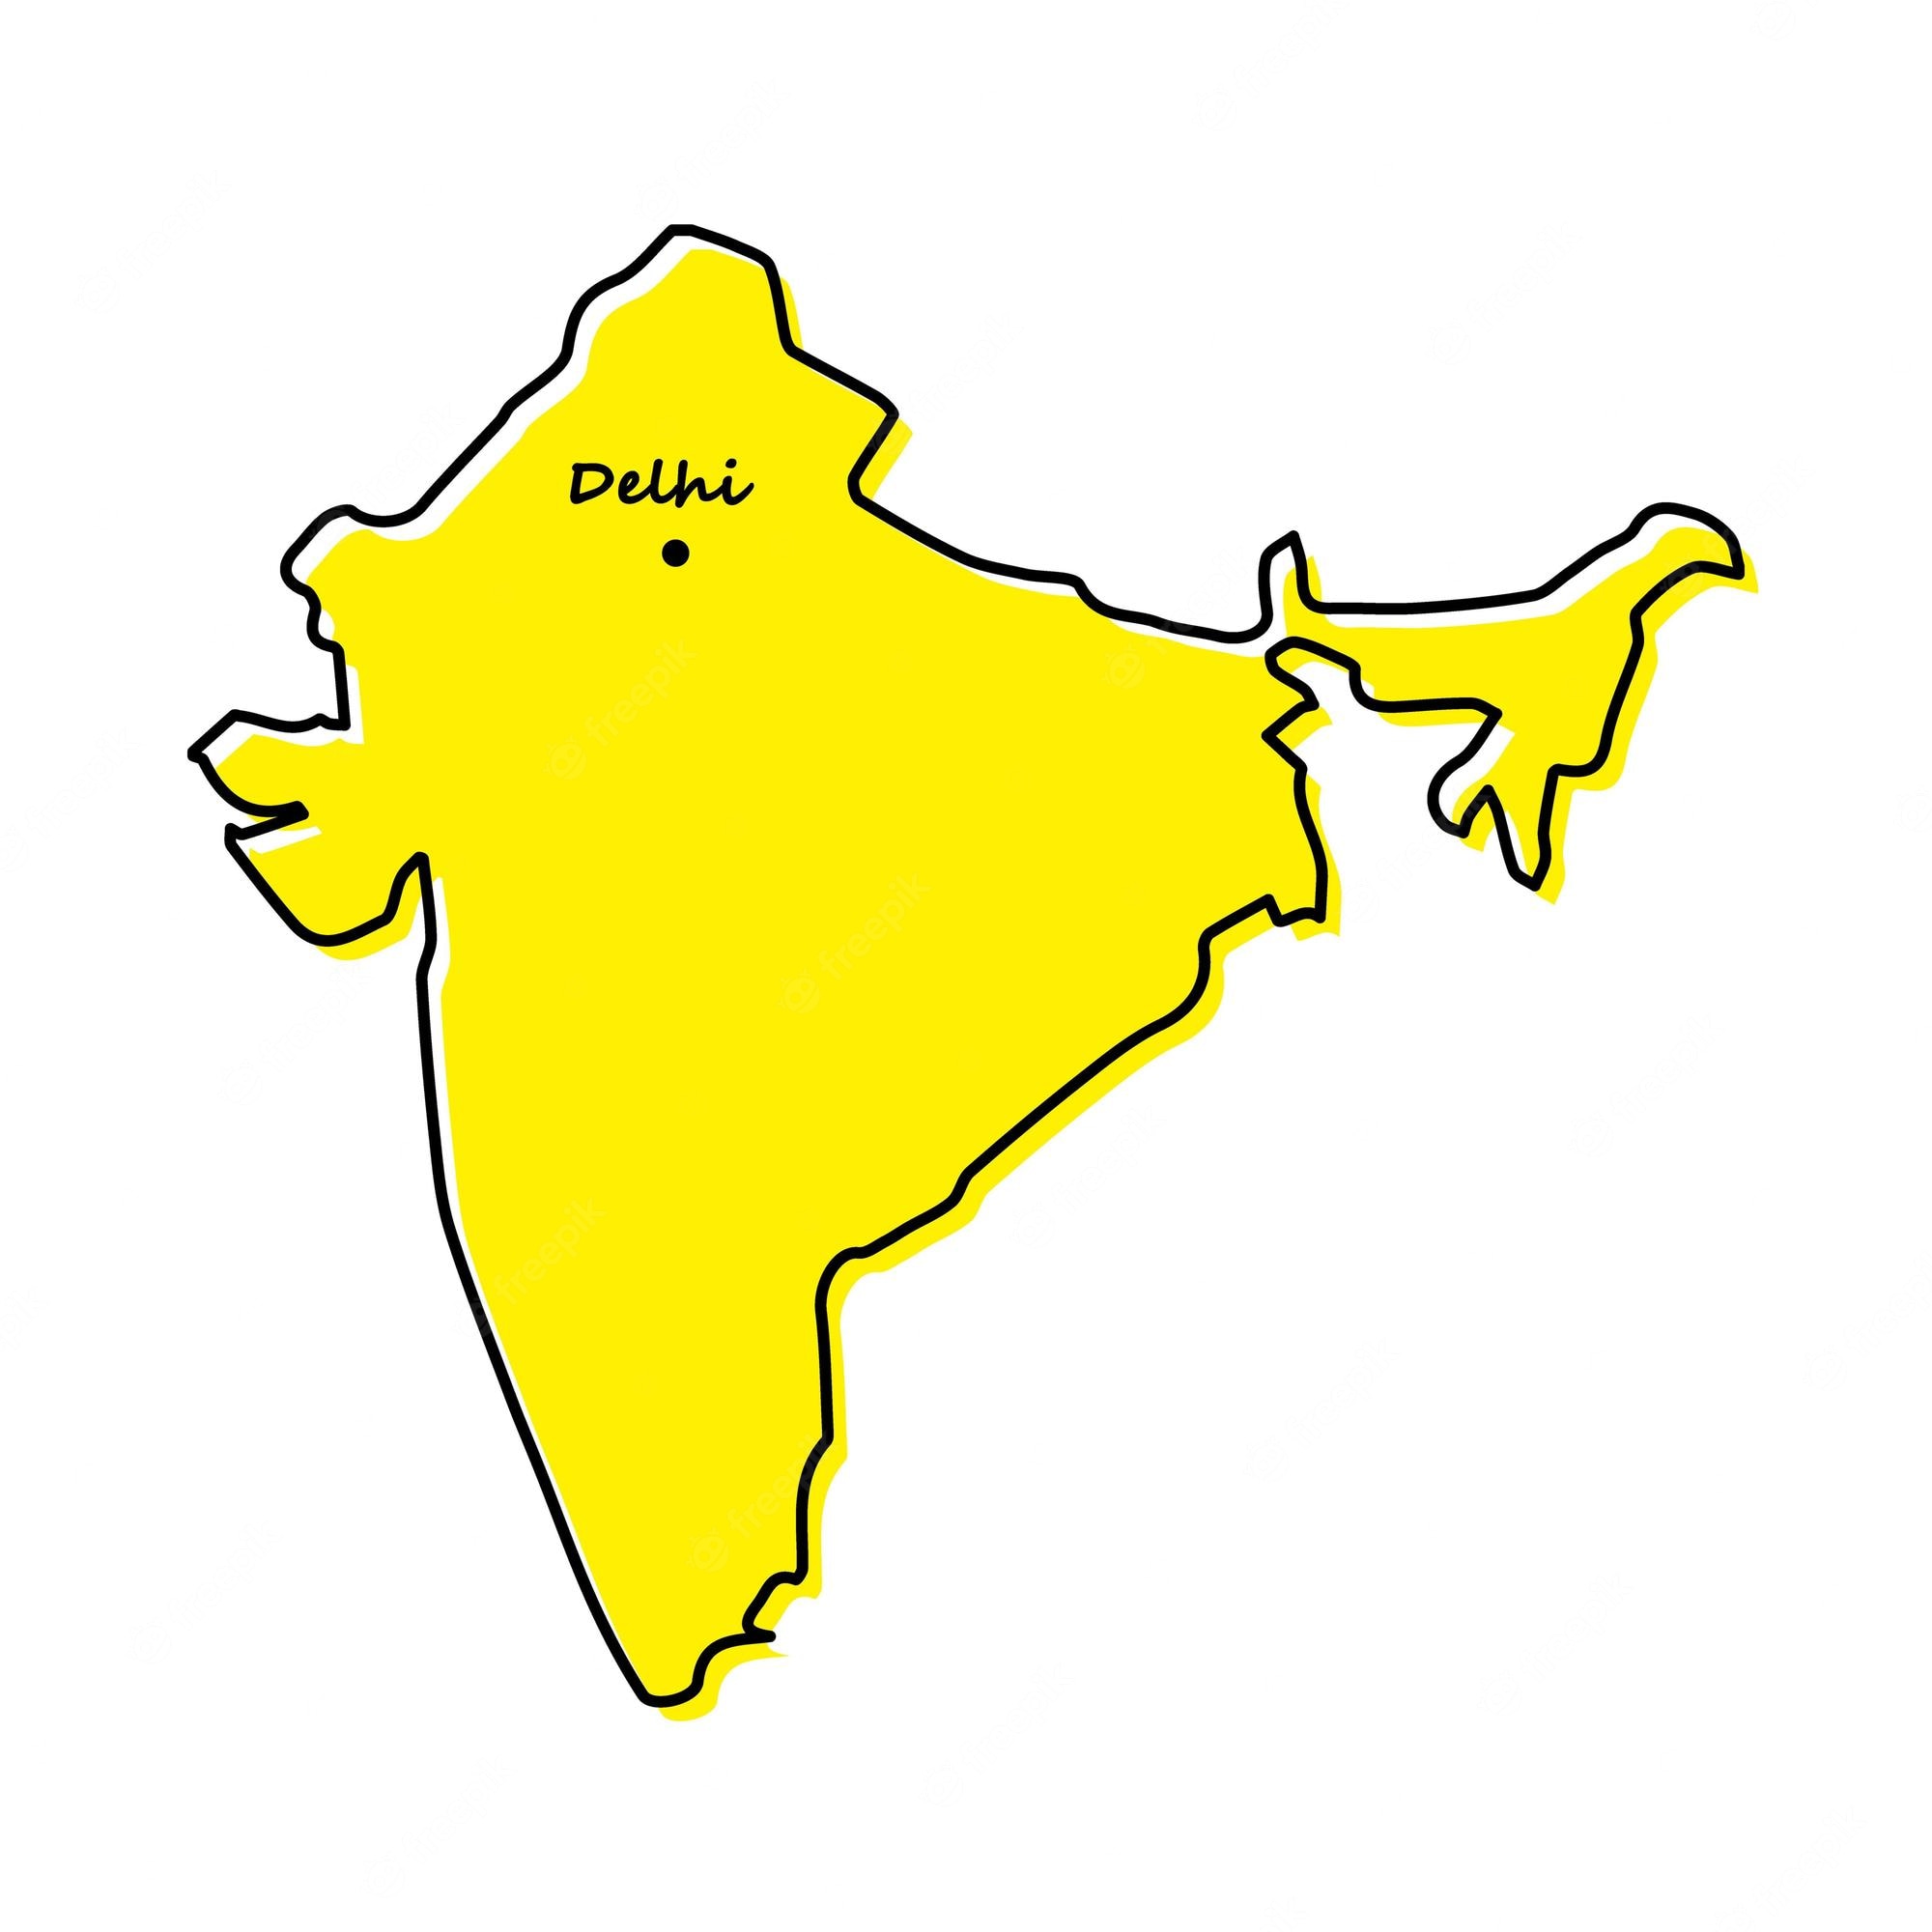 Outline Map Of India Image. Free Vectors, & PSD